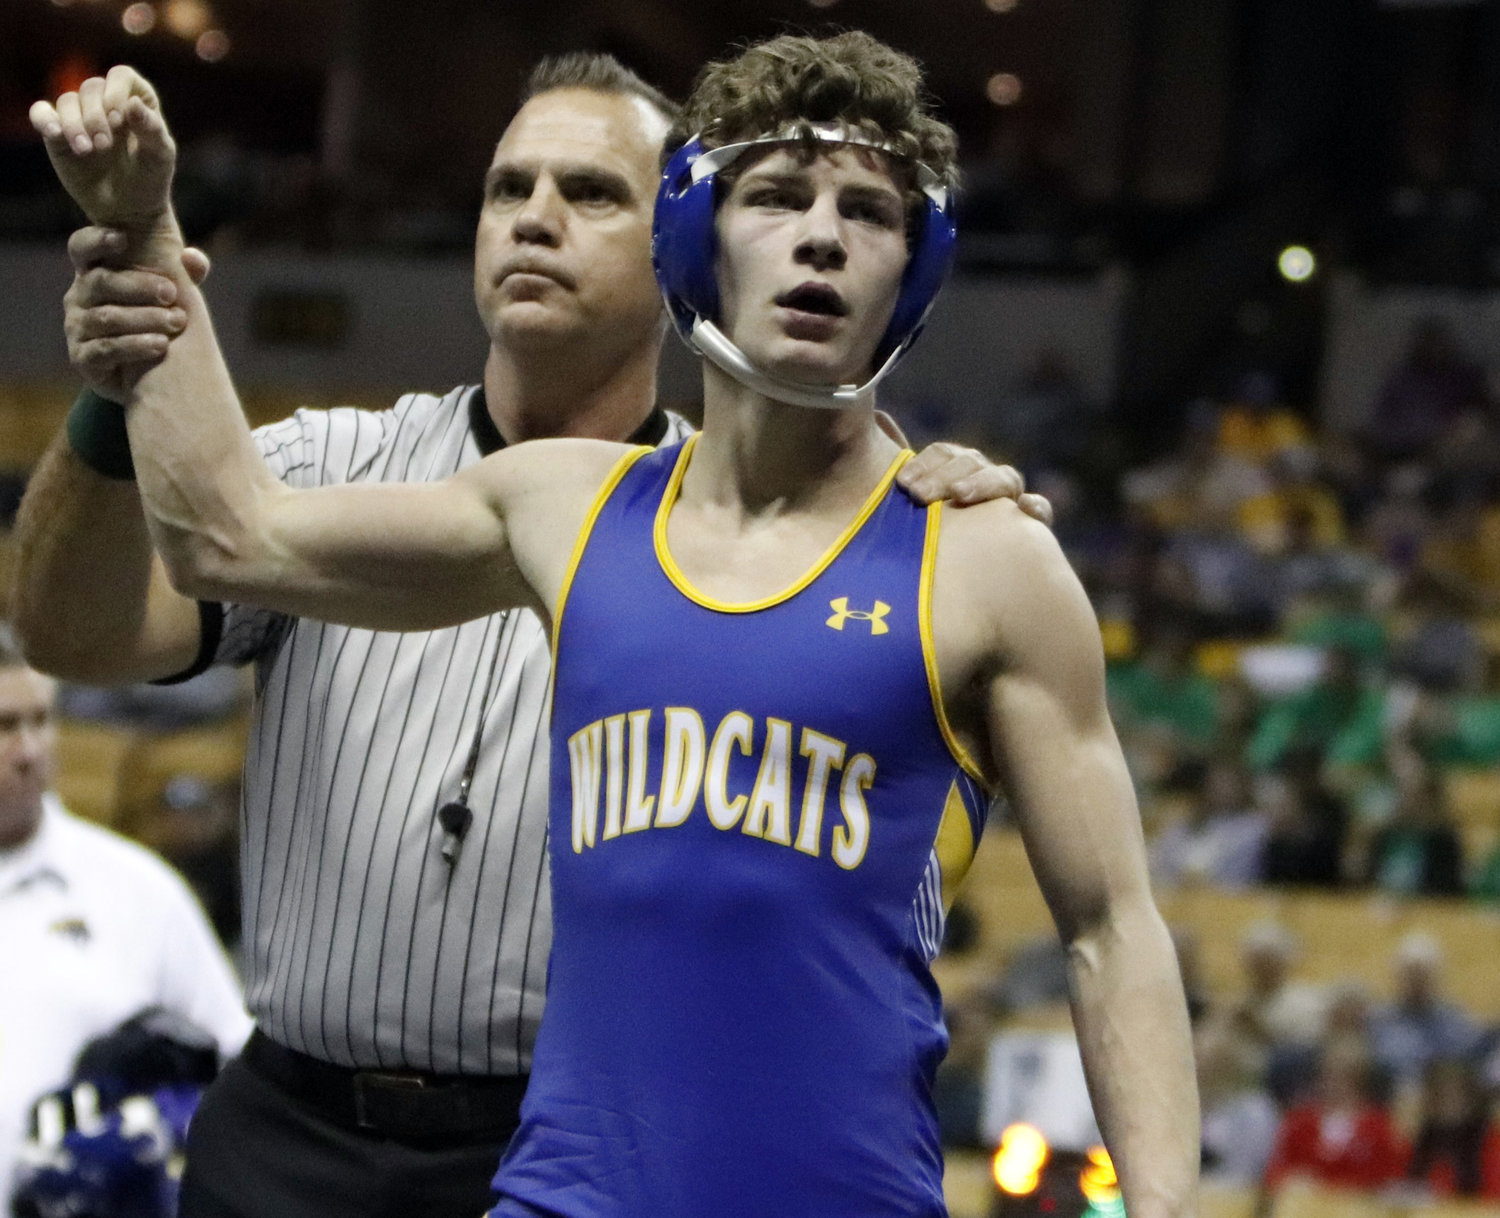 Wright City senior David Riggs' arm is raised by an official after winning a match at the state wrestling tournament.